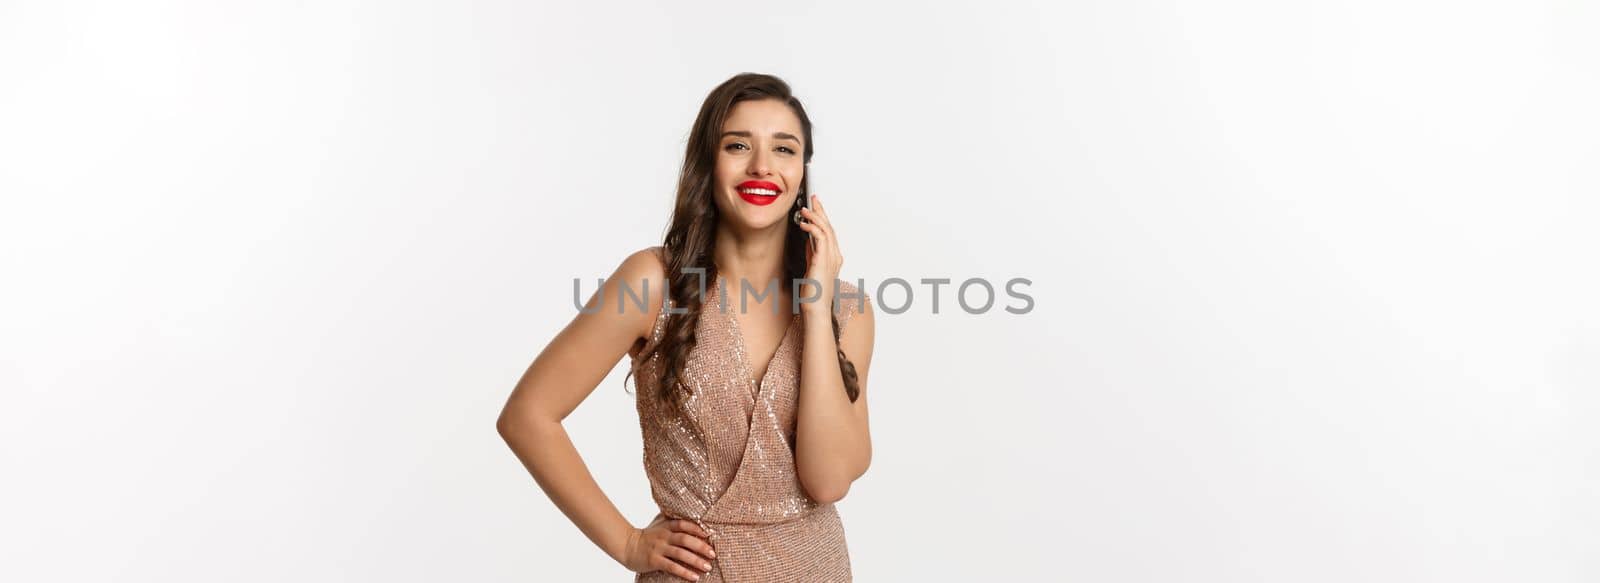 Christmas party and celebration concept. Attractive young woman with red lips, wearing luxury dress, talking on mobile phone and smiling, standing over white background.